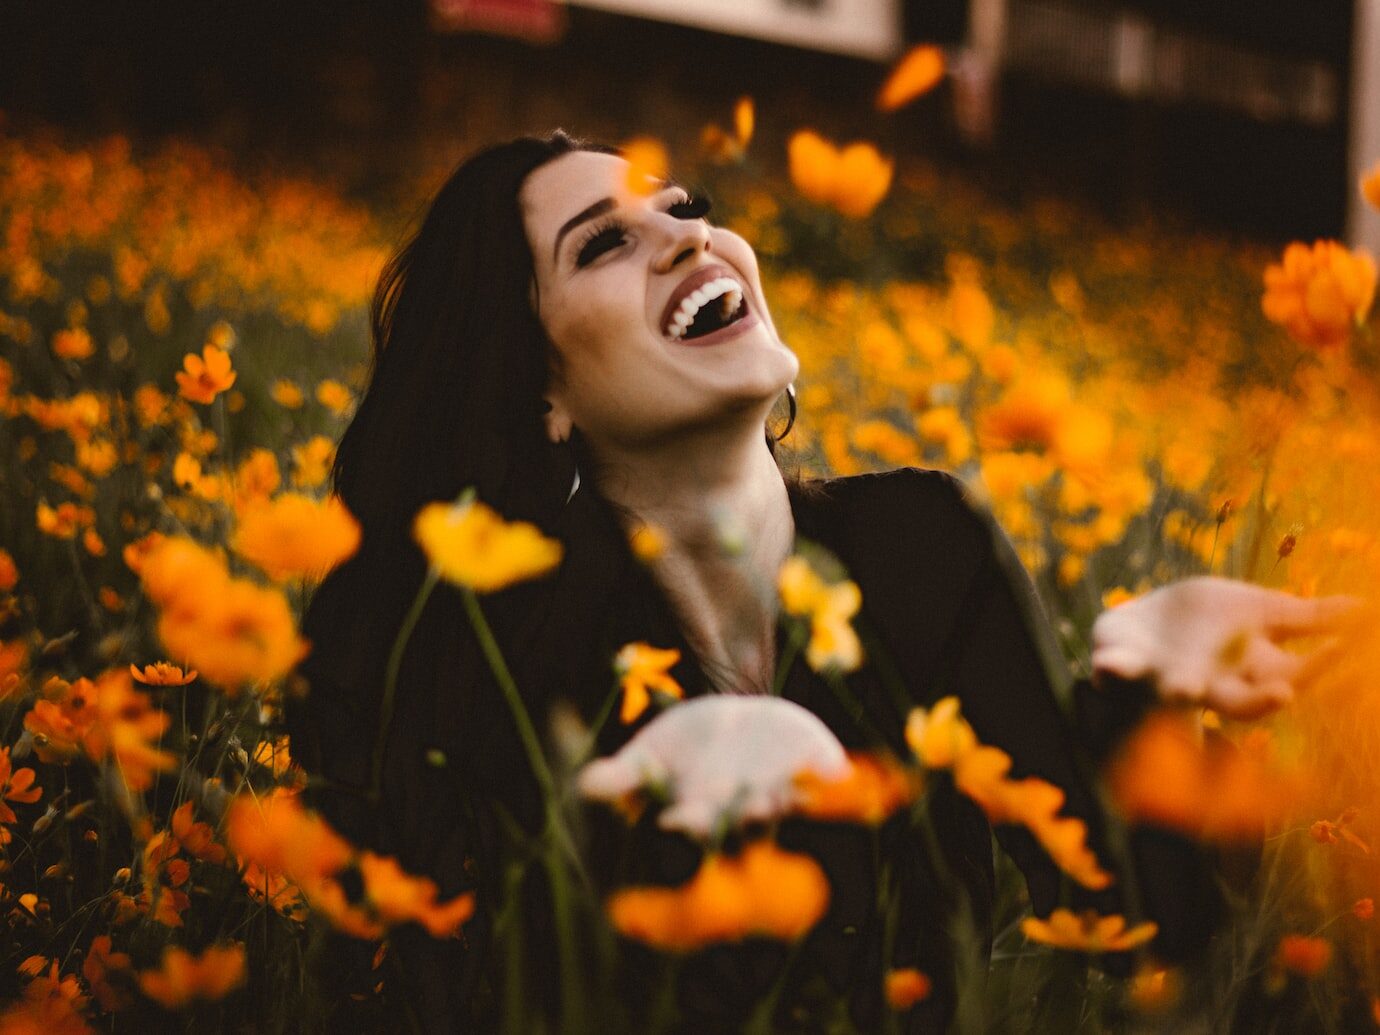 woman laughing on flower field